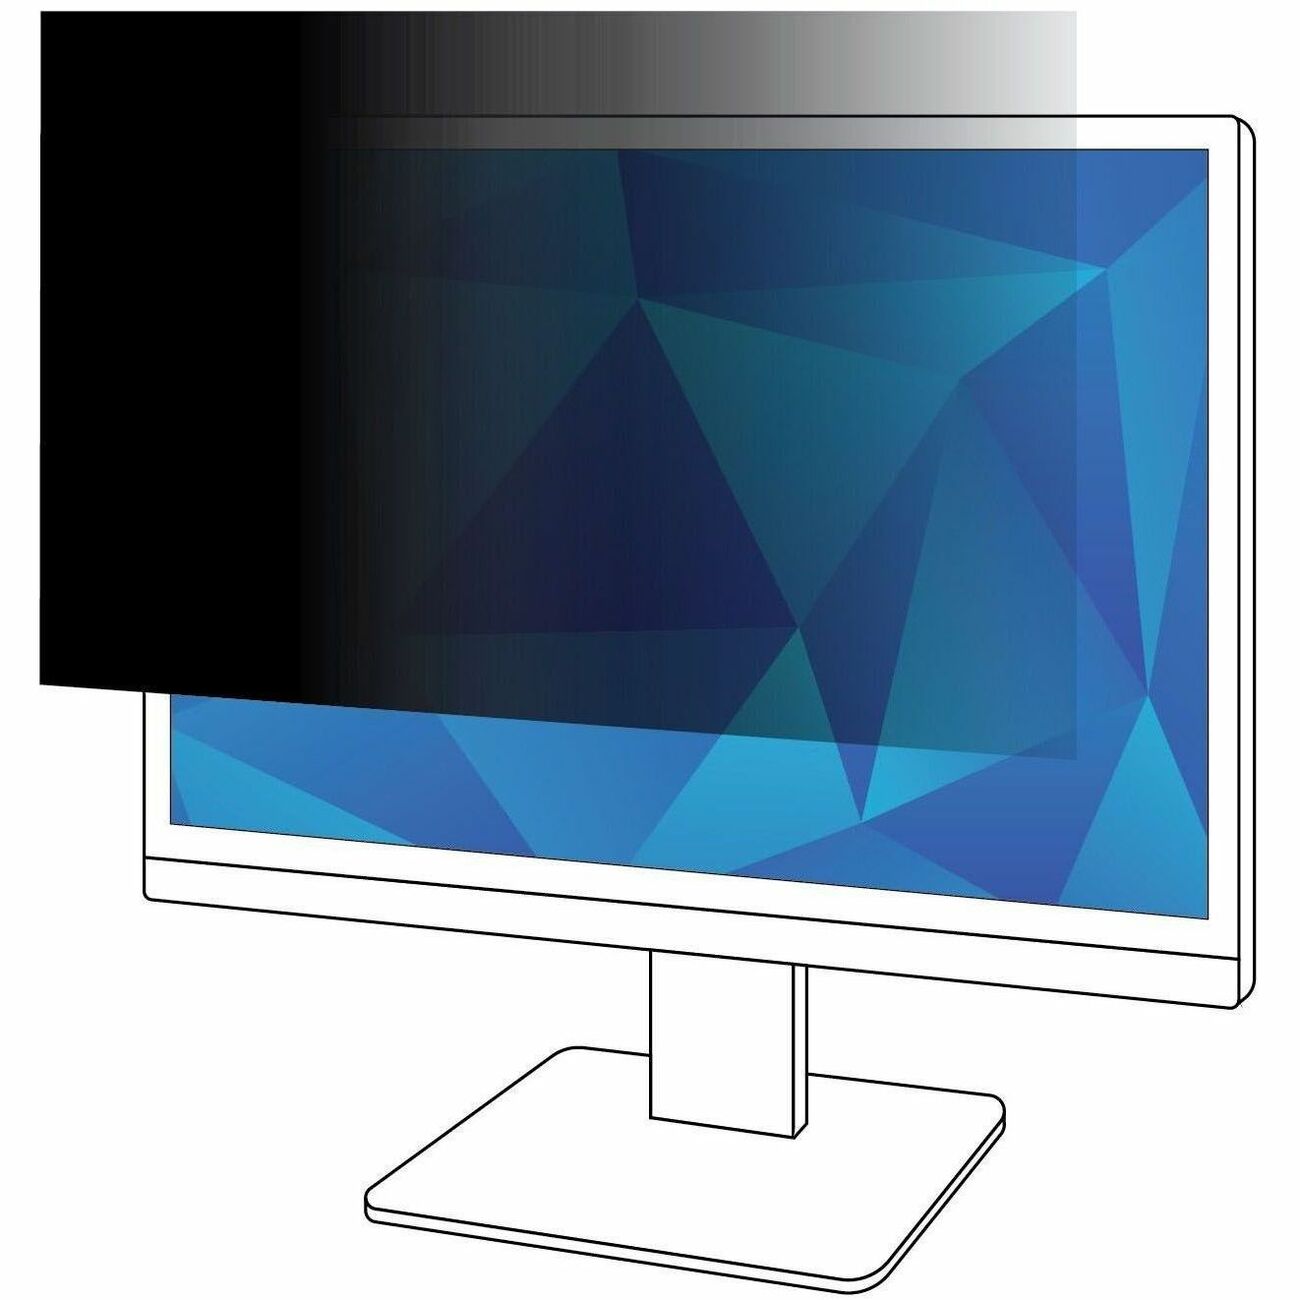 3m-privacy-filter-for-43in-monitor-169-pf430w9b-for-43-widescreen-lcd-monitor-169-scratch-resistant-fingerprint-resistant-dust-resistant-anti-glare_mmmpf430w9b - 1